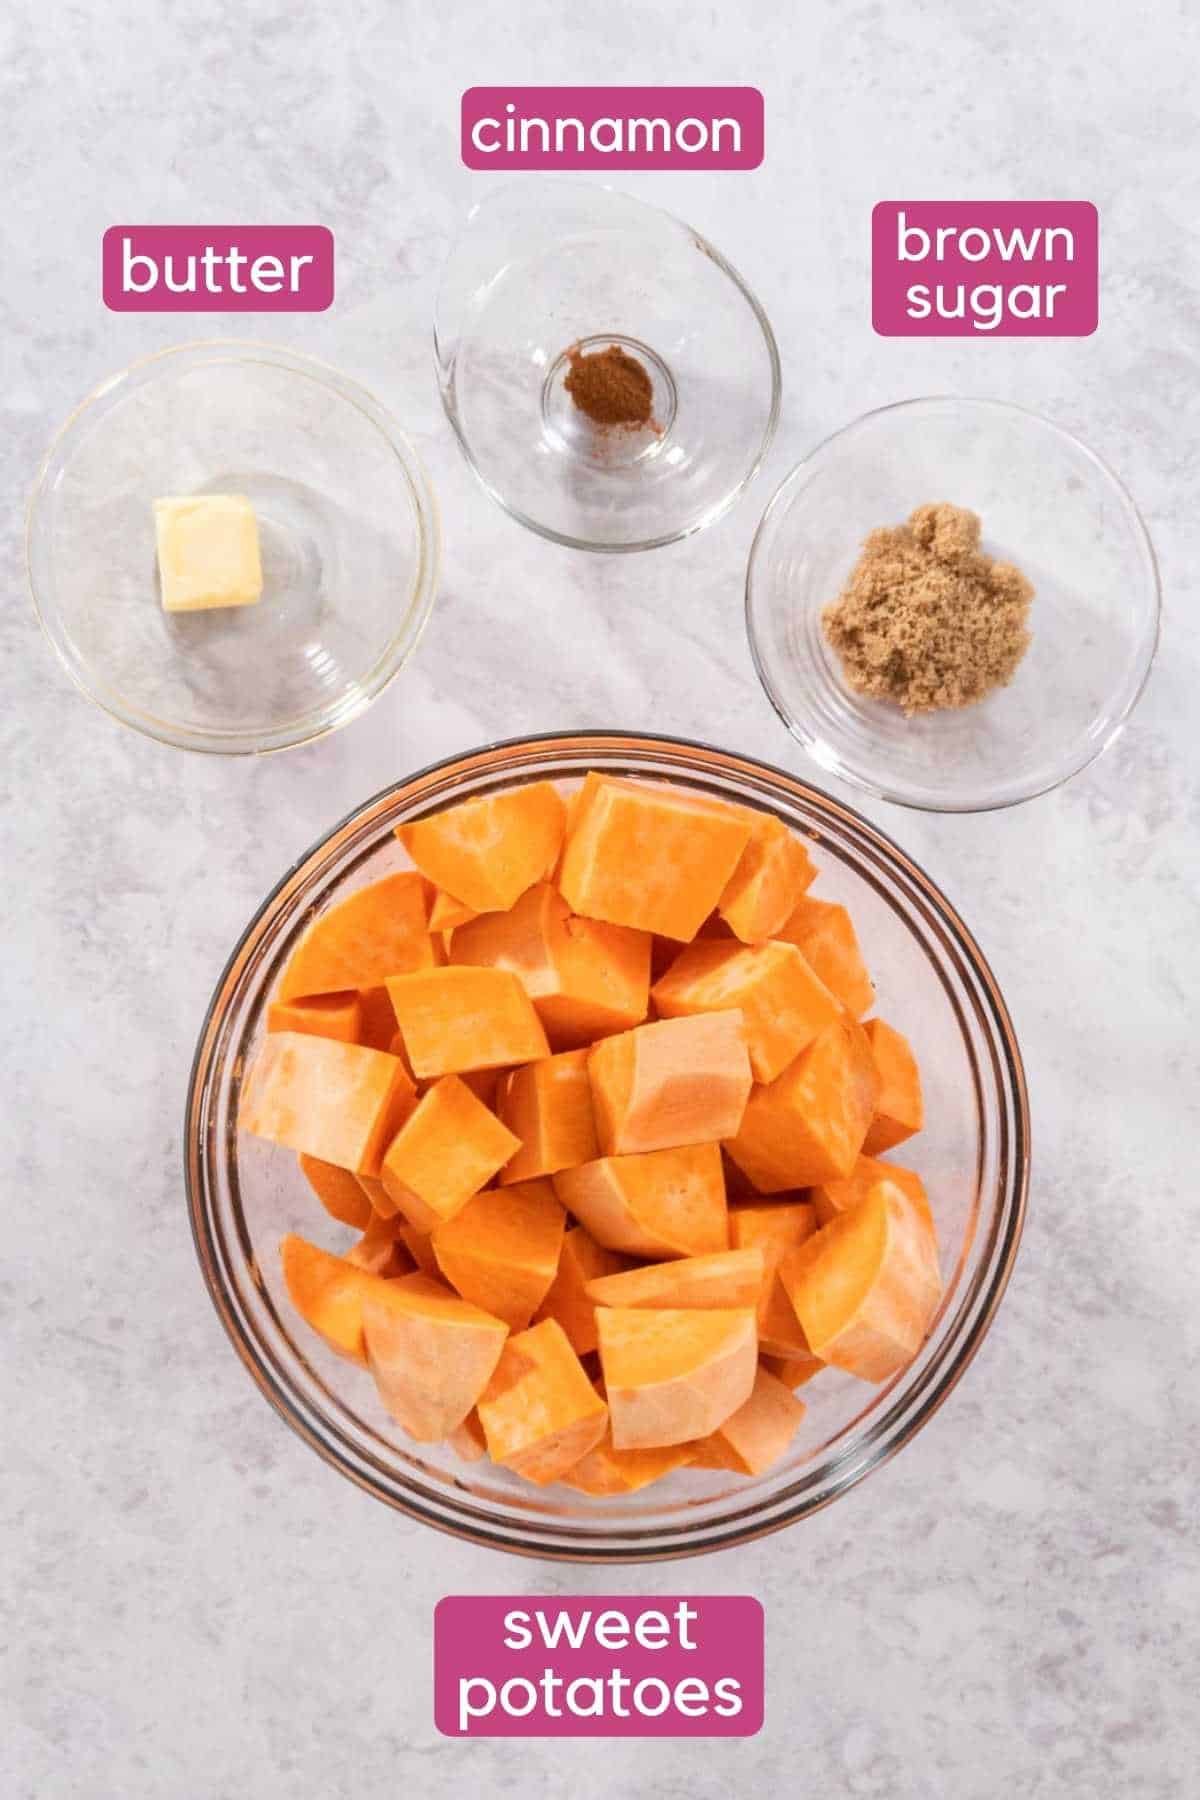 Four bowls on a counter background. One is a bowl of cubed sweet potatoes, another brown sugar, another cinnamon, and fourth is butter.